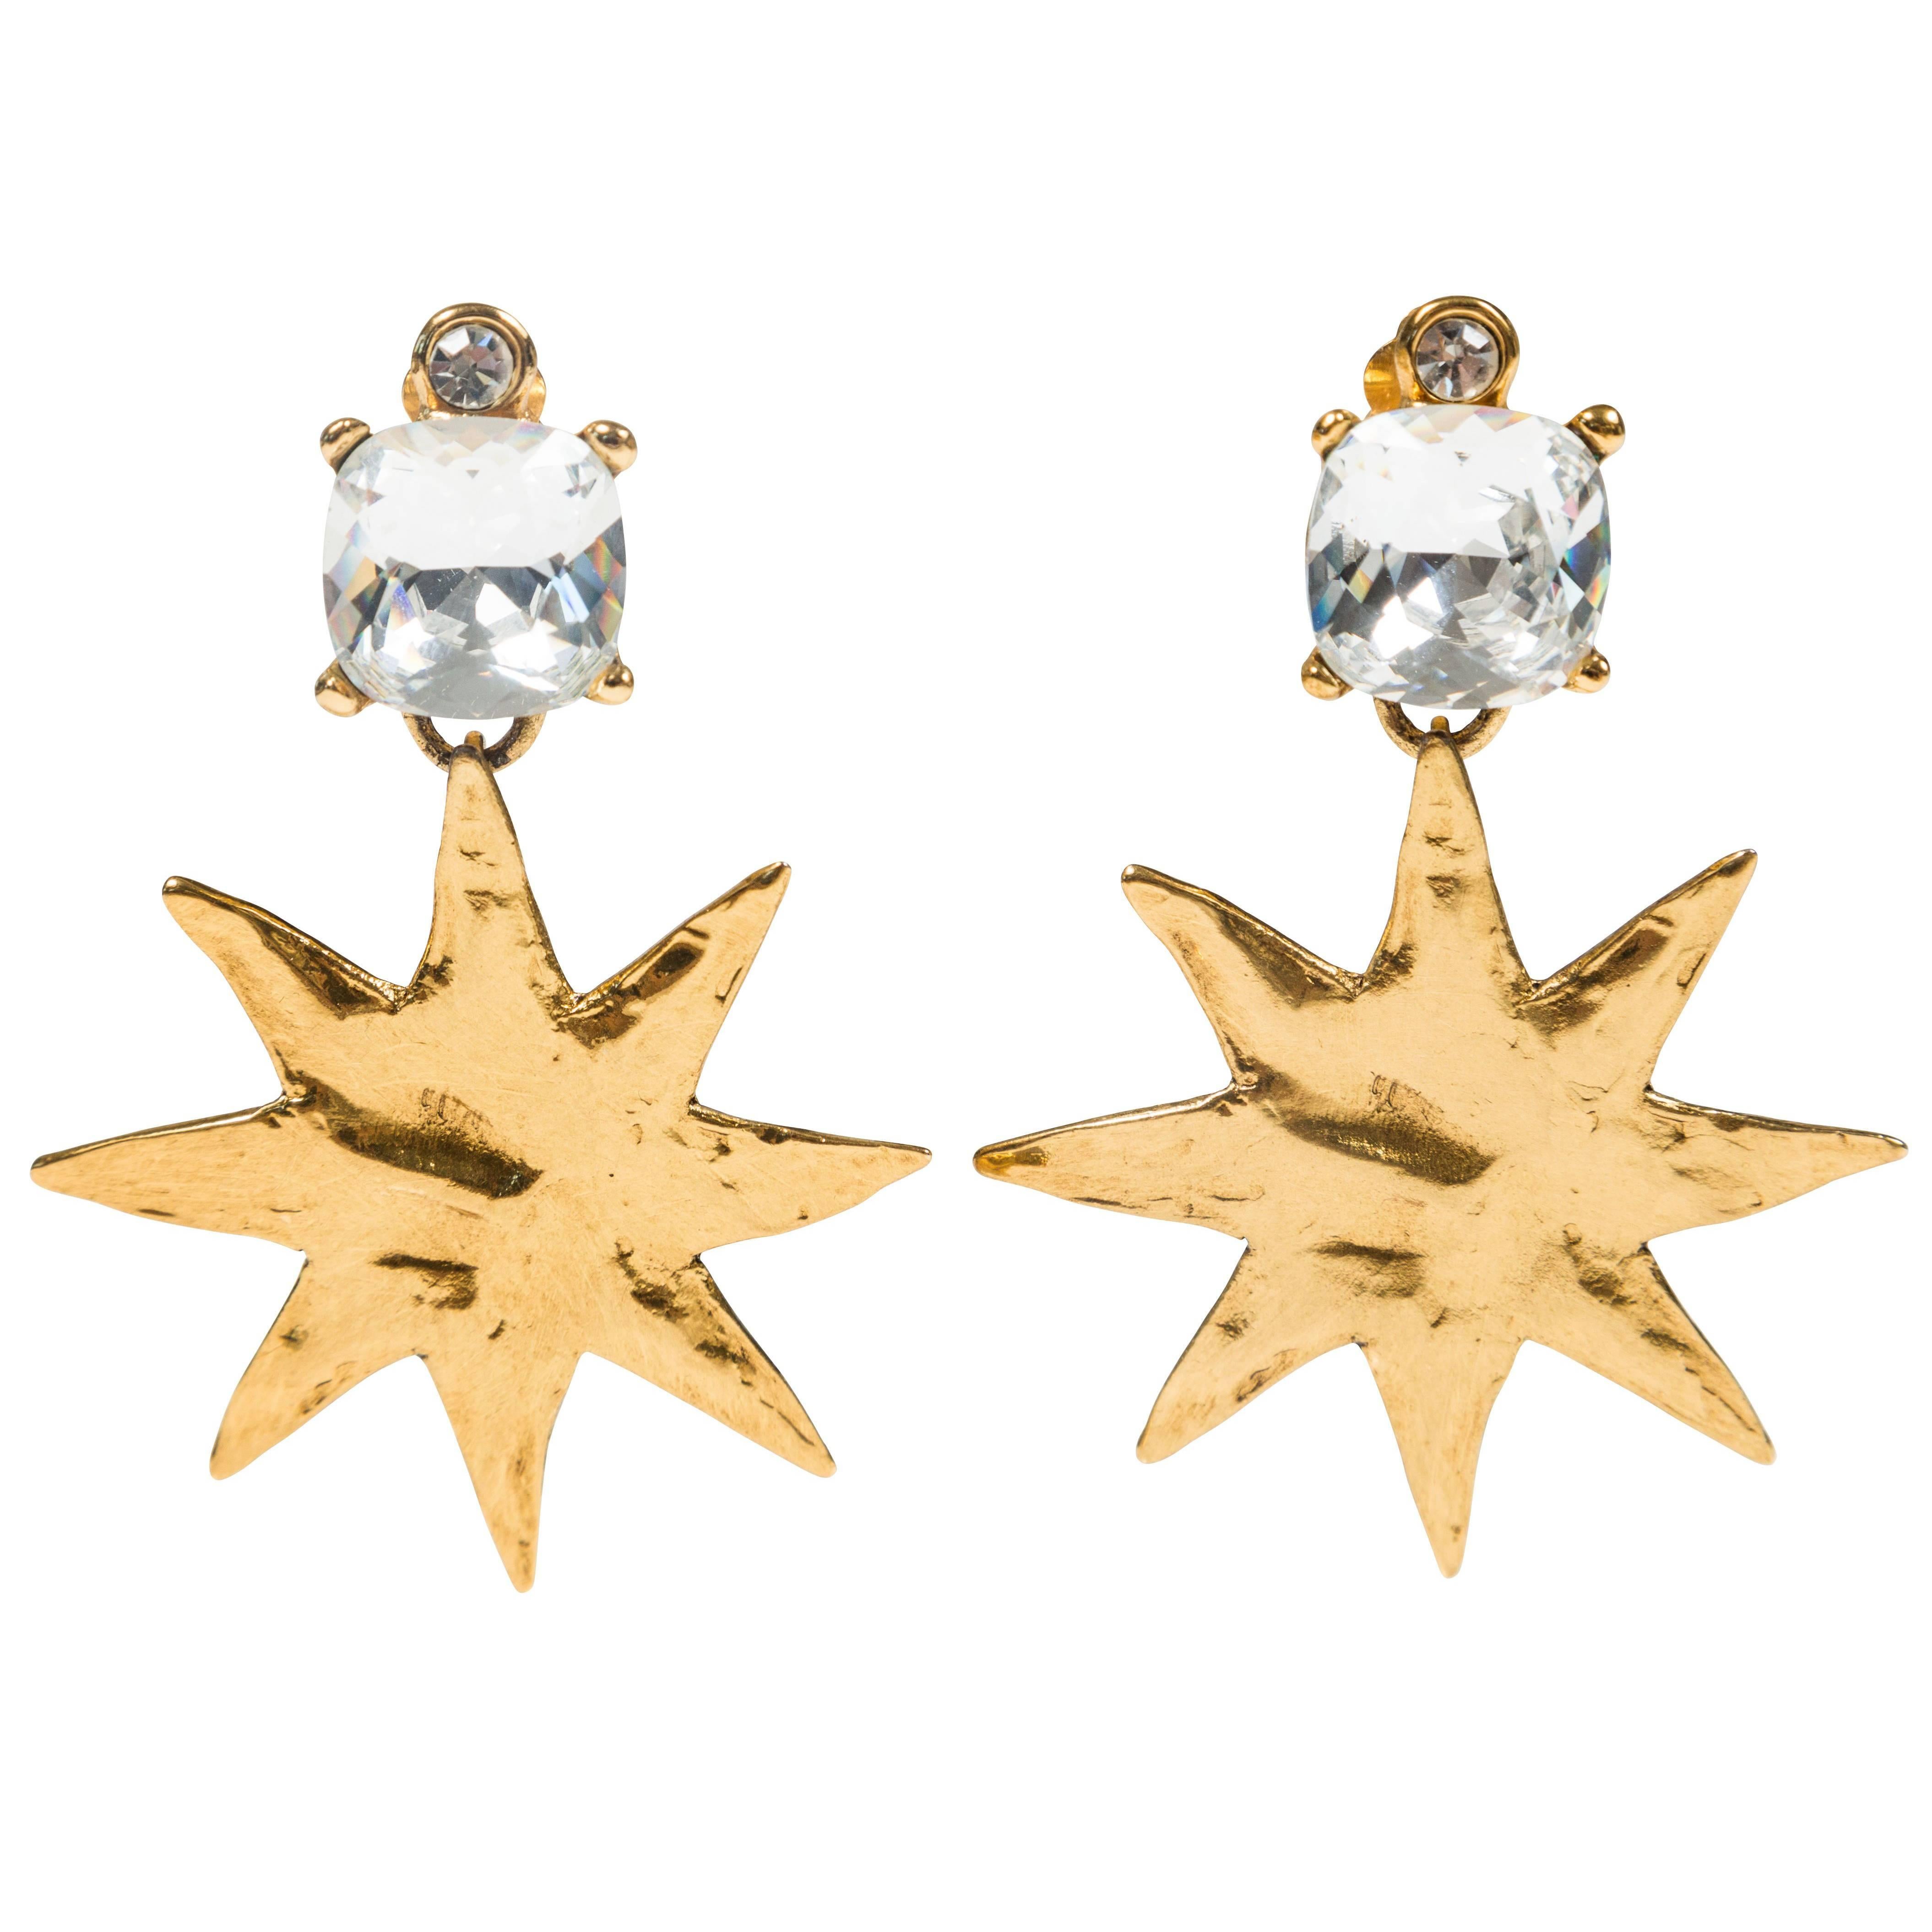 Frolicsome Vintage Gilt & Rhinestone Star Ear Clips by Yves Saint Laurent